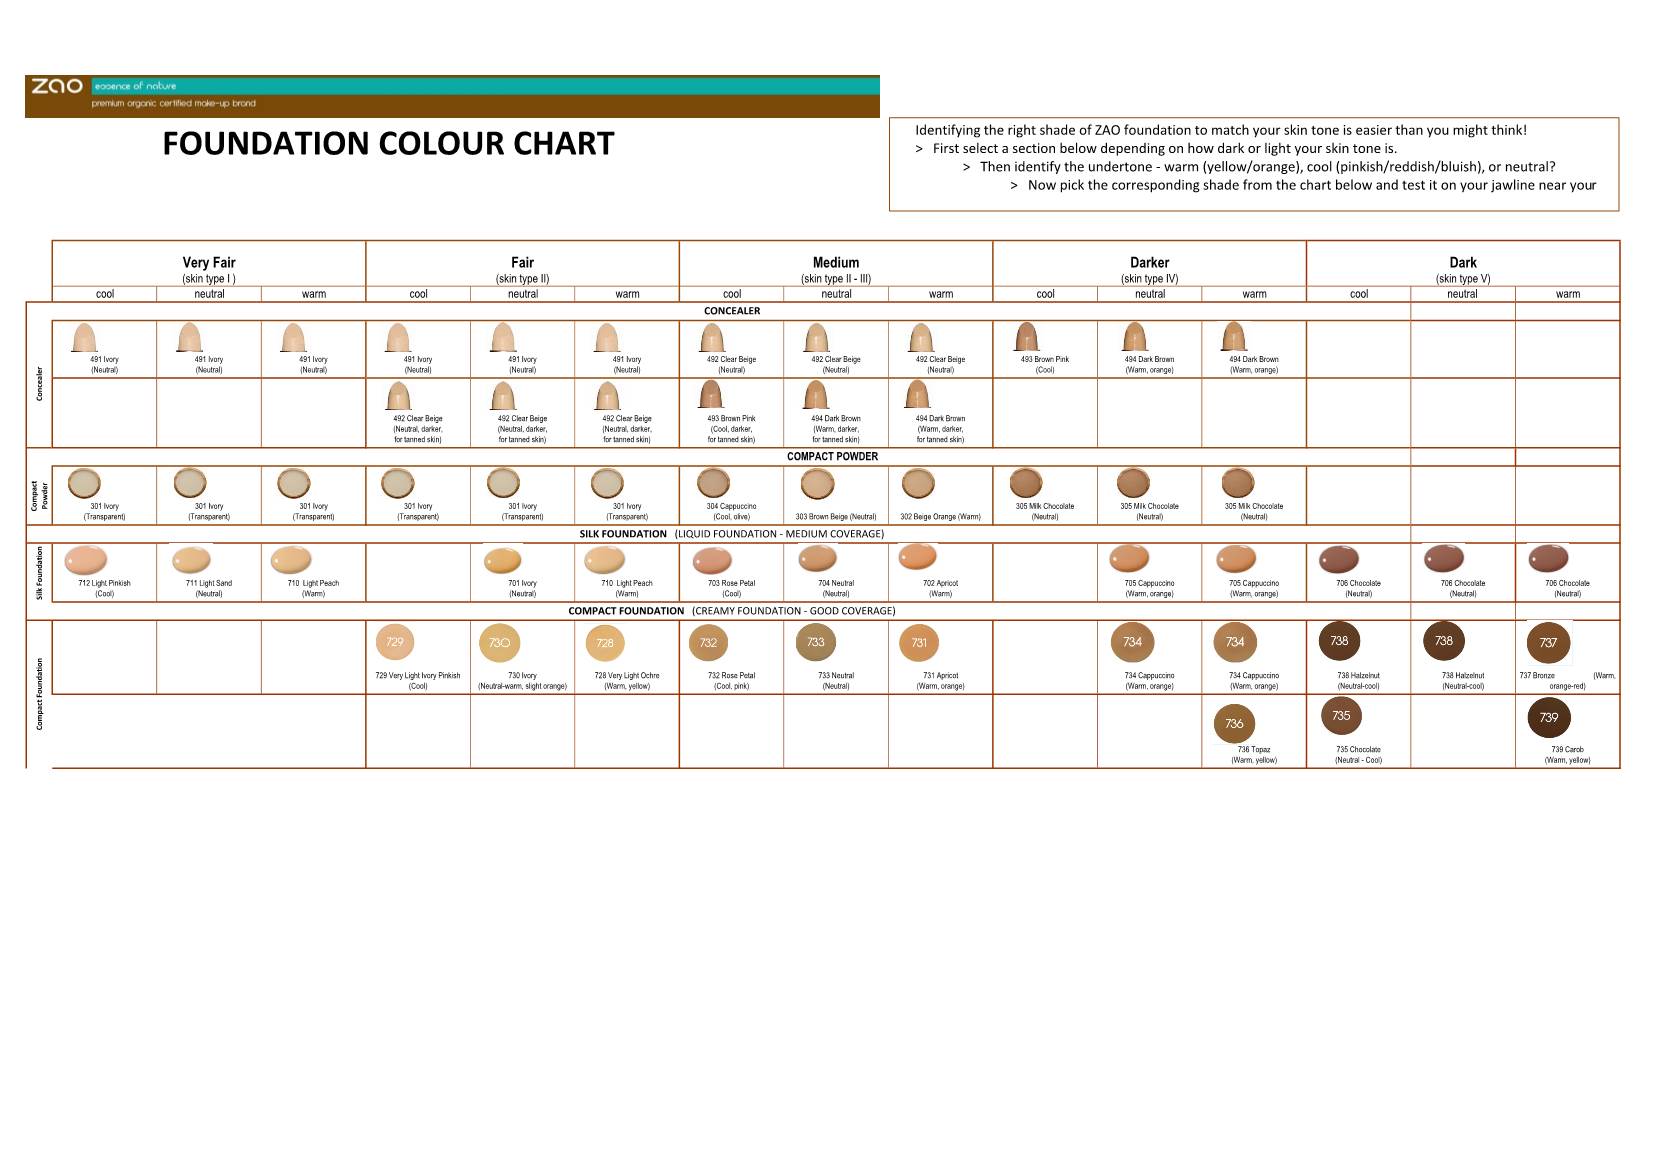 FOUNDATION COLOUR CHART > First Select a Section Below Depending on How Dark Or Light Your Skin Tone Is